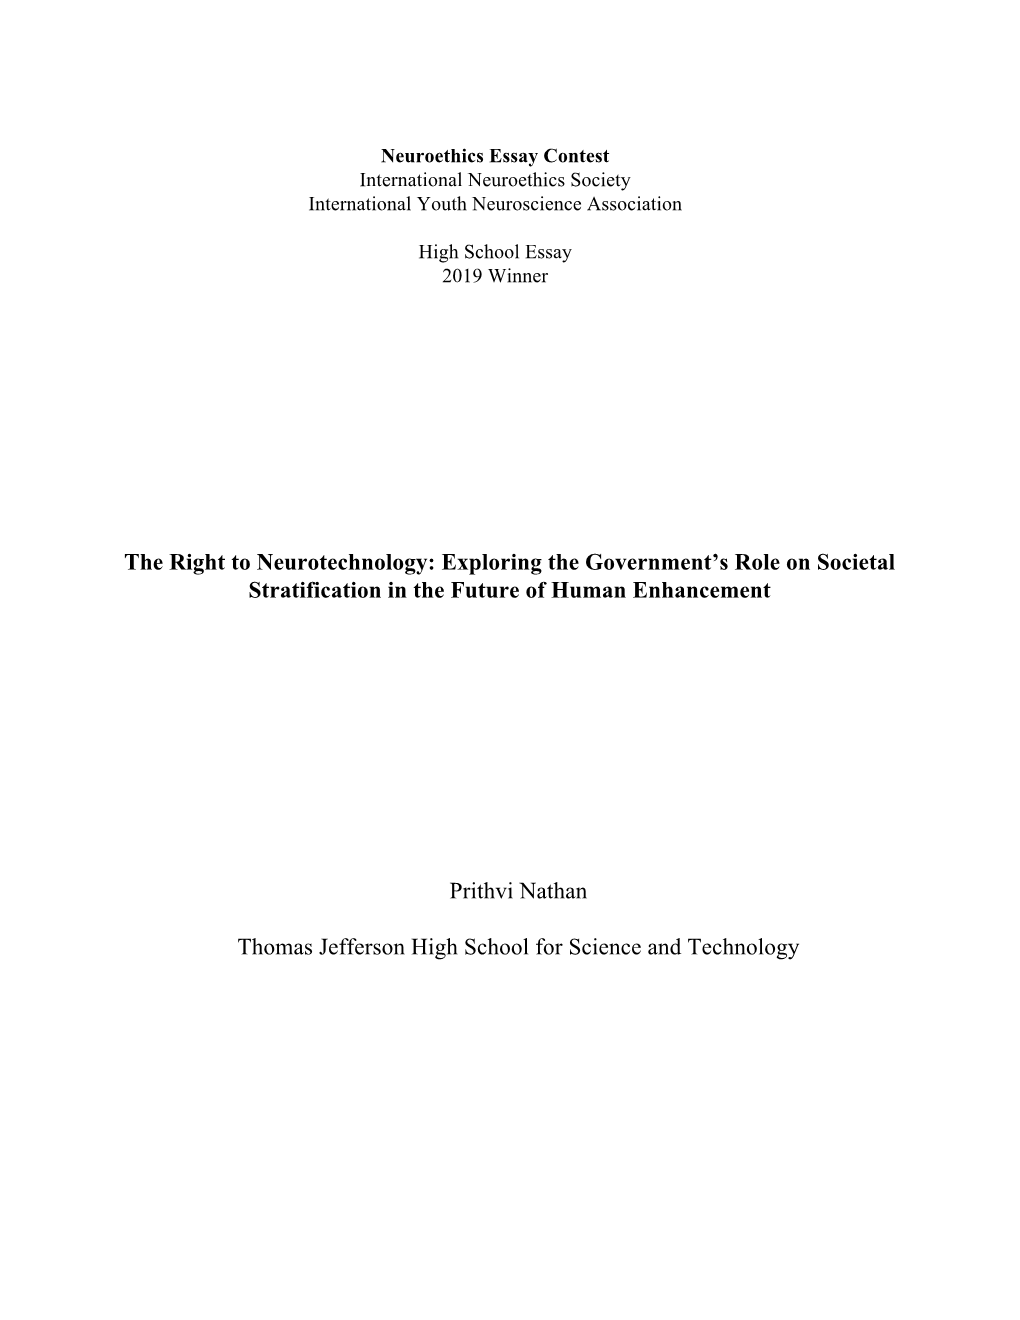 The Right to Neurotechnology: Exploring the Government's Role